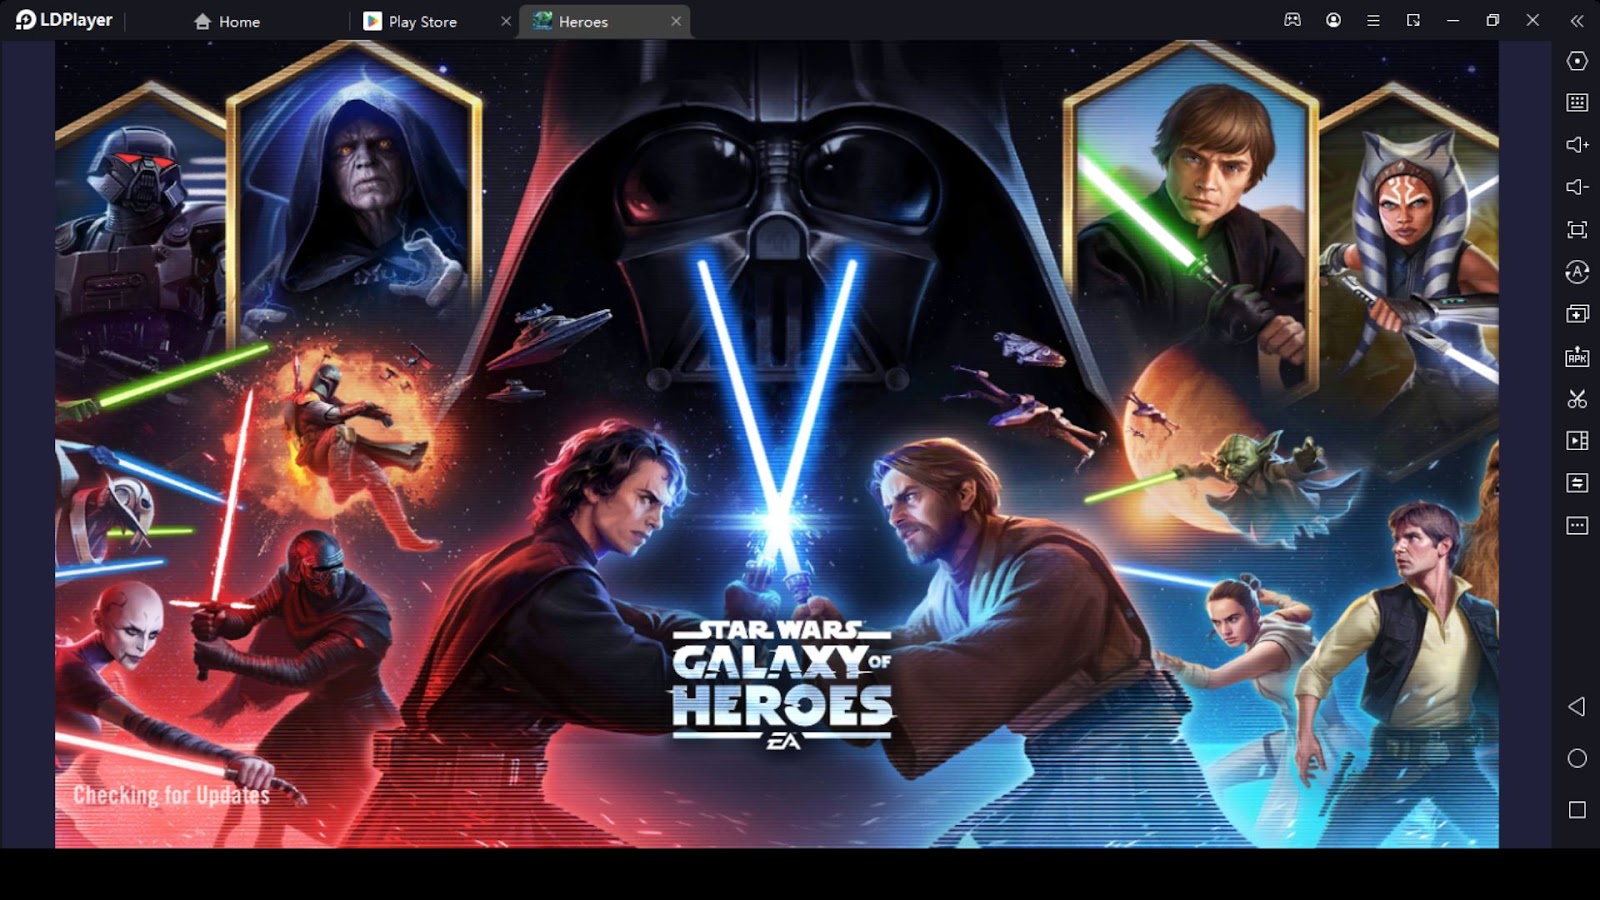 Star Wars™: Galaxy of Heroes Farming Guide for the Legendary Heroes